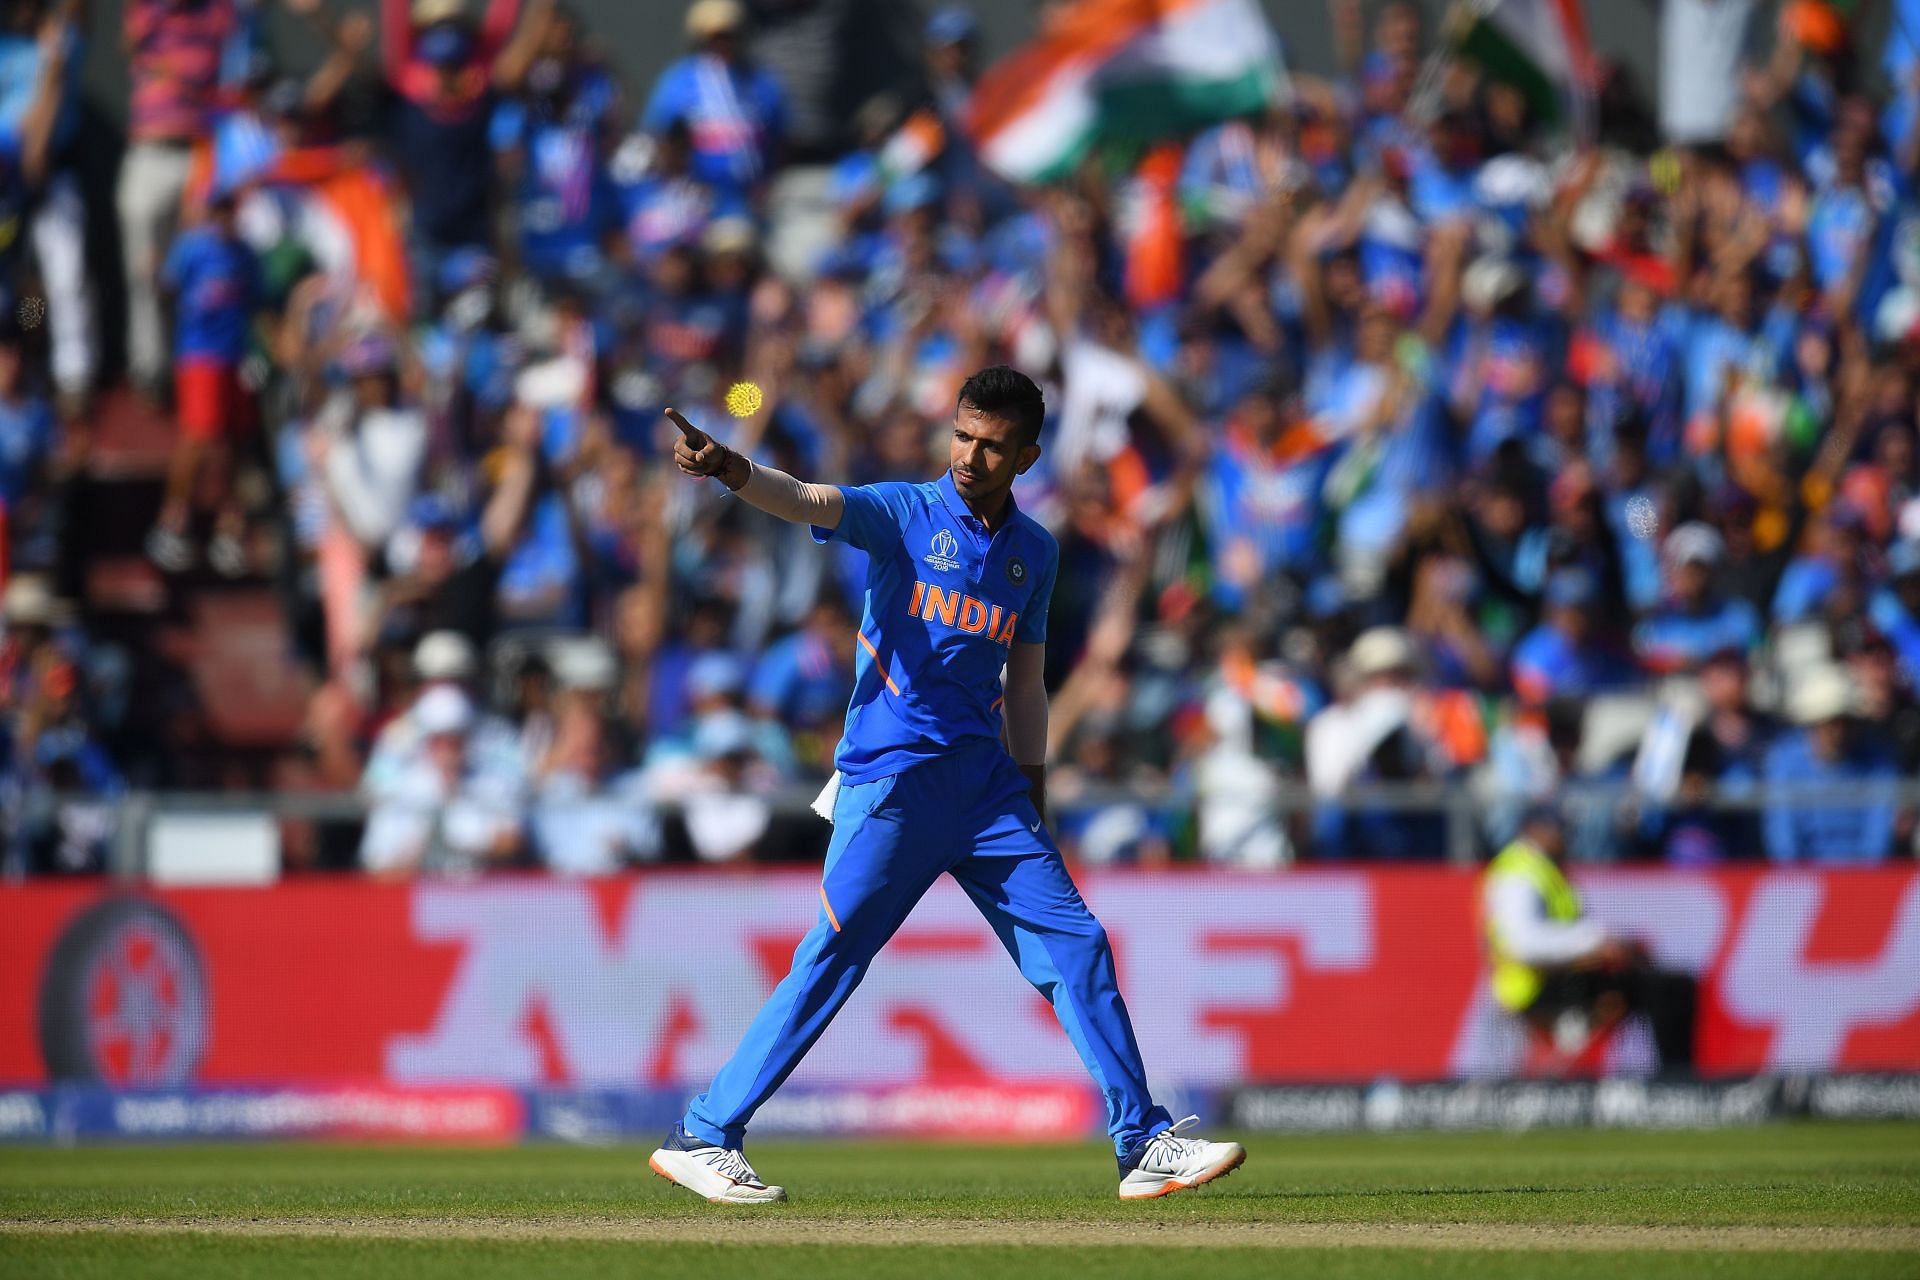 Chahal will be keen to resurrect his India career